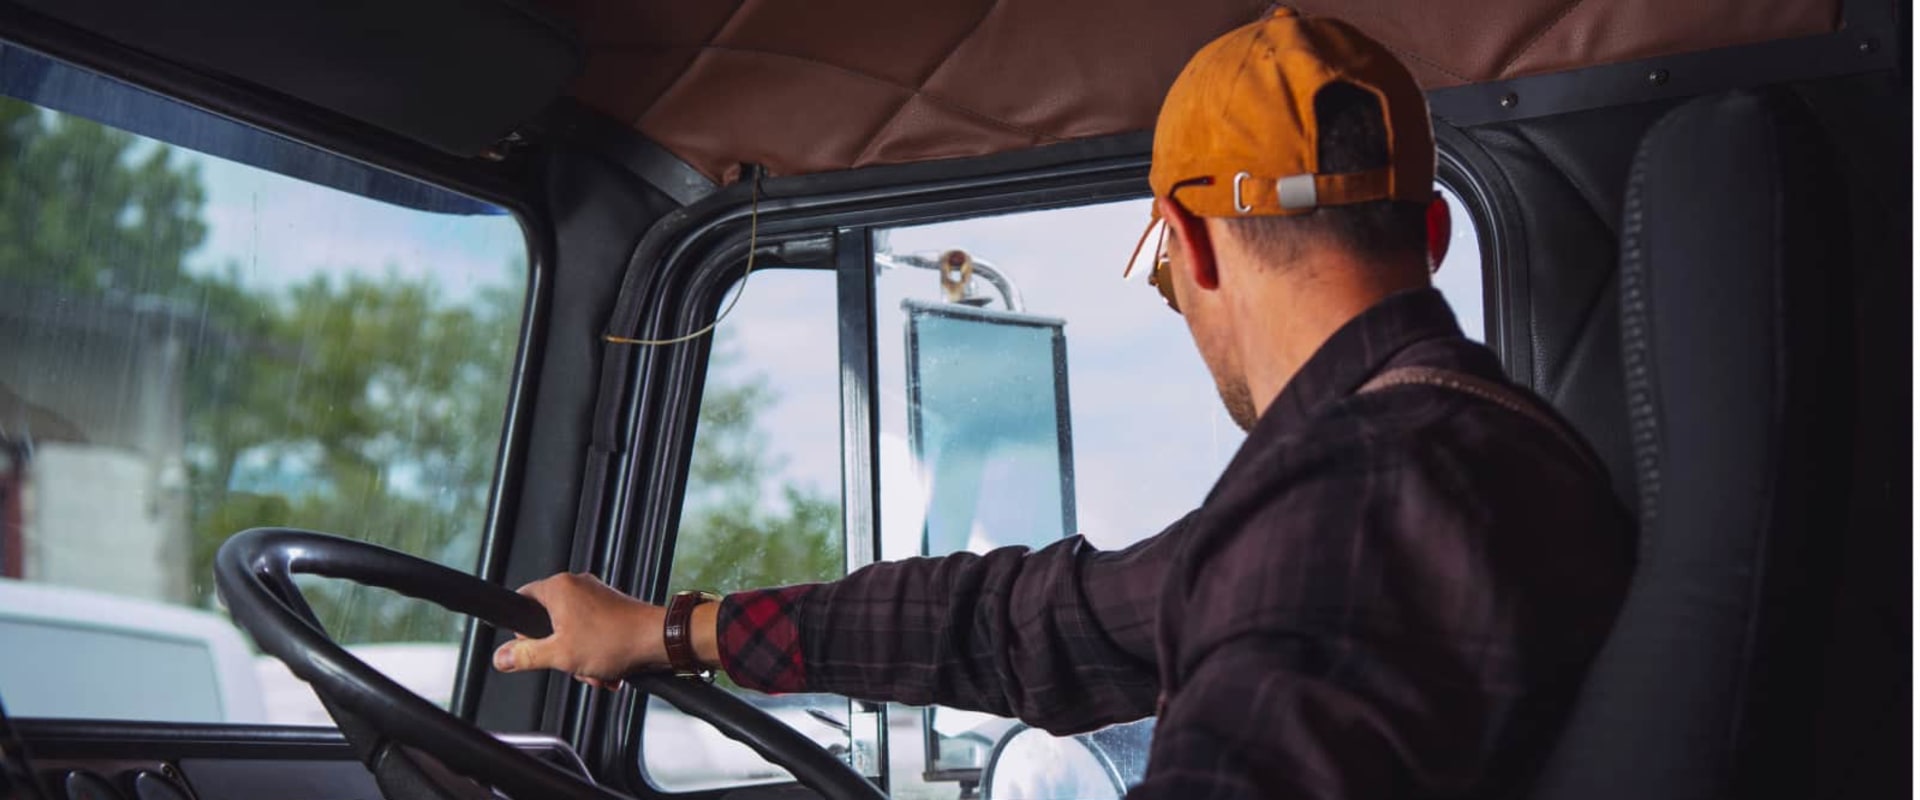 Is truck driving a respectable career?